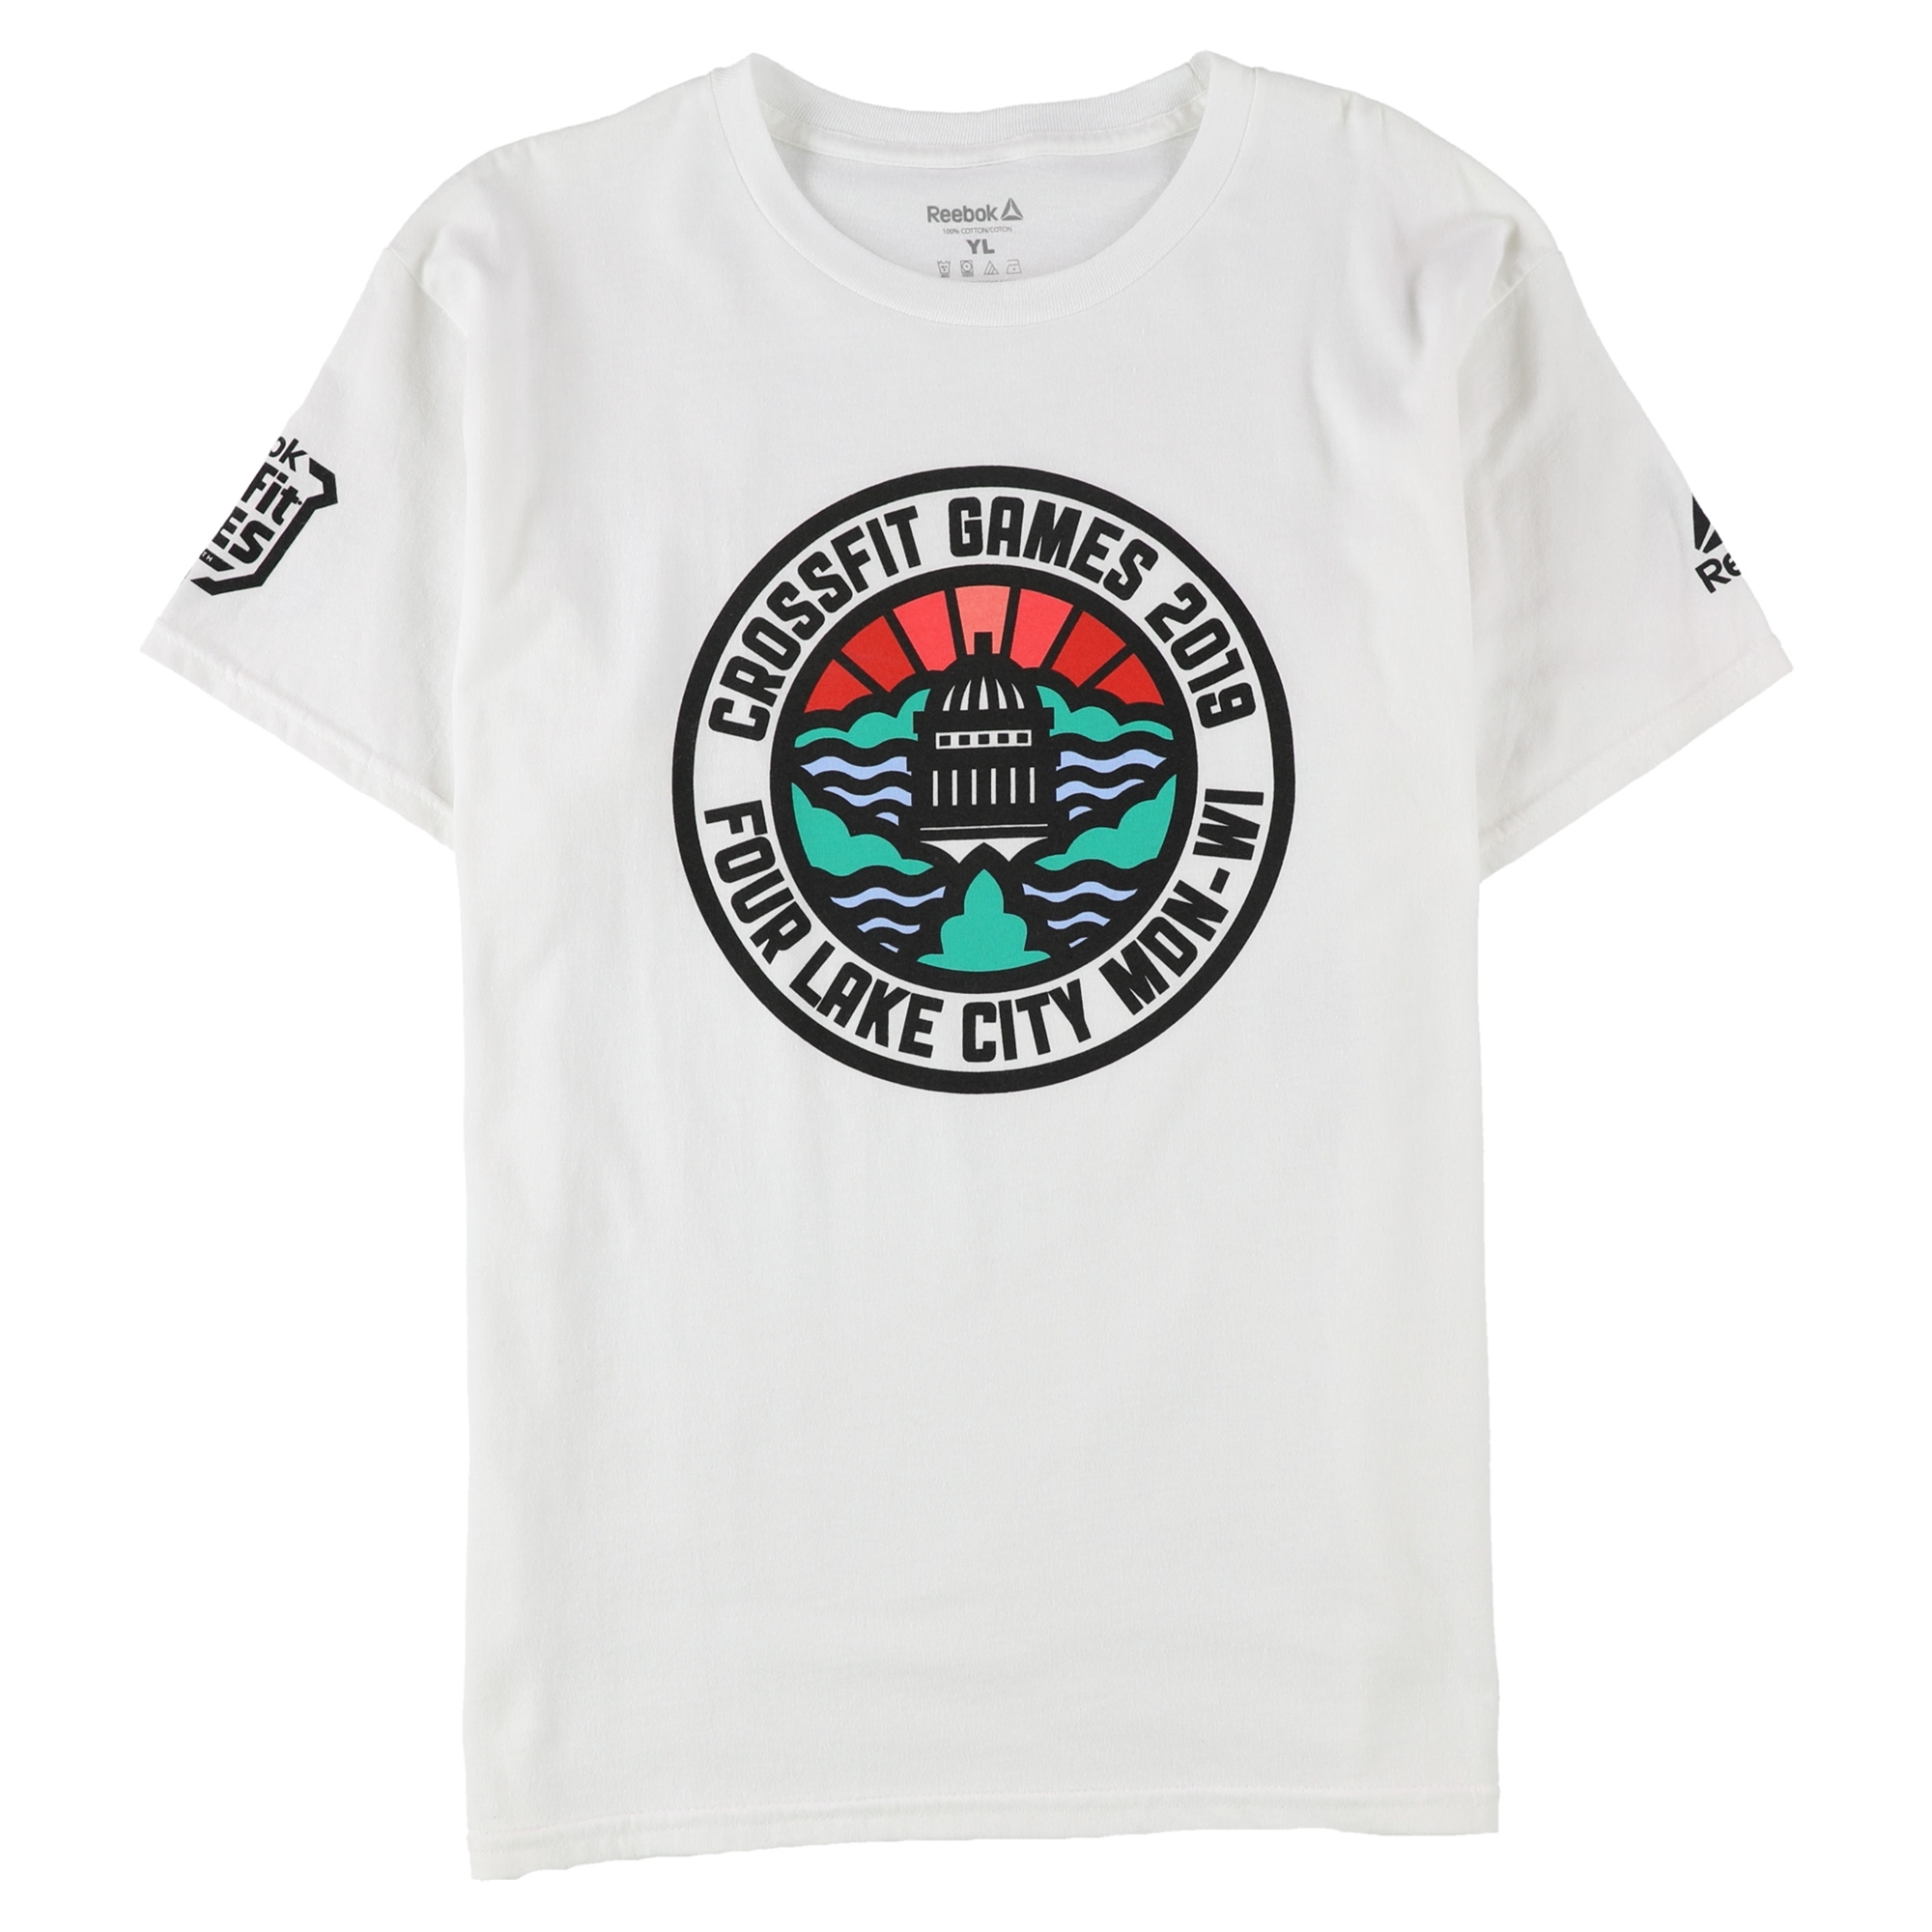 Buy Boys CrossFit Games 2019 Four Lake City Graphic T-Shirt Online | TagsWeekly.com